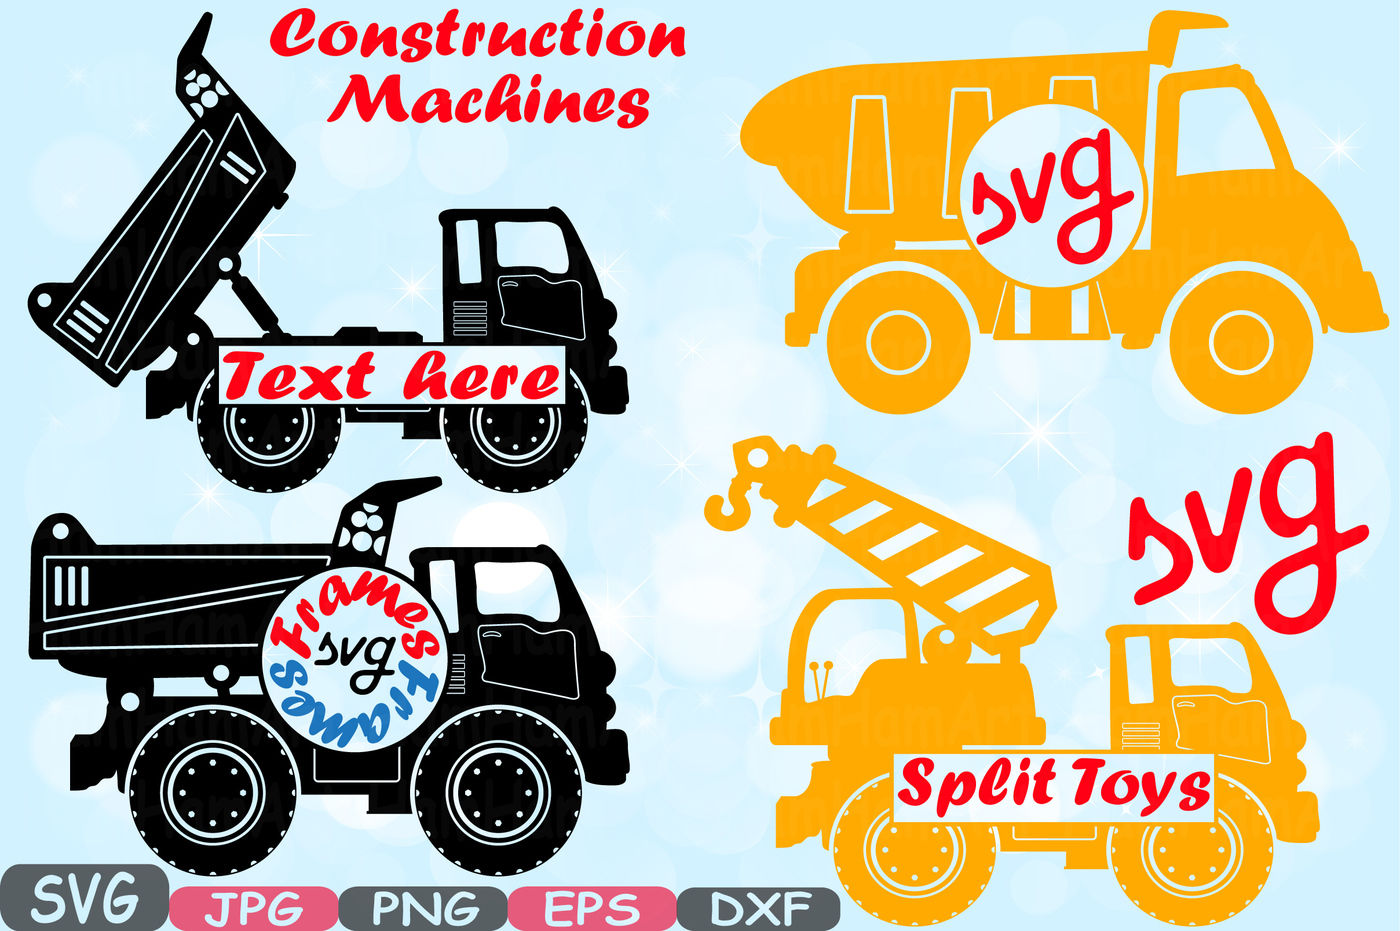 Download Construction Machines Circle Split Silhouette Svg File Cutting Files Dump Trucks Toy Toys Cars Excavator Stickers Builders Clipart 652s By Hamhamart Thehungryjpeg Com